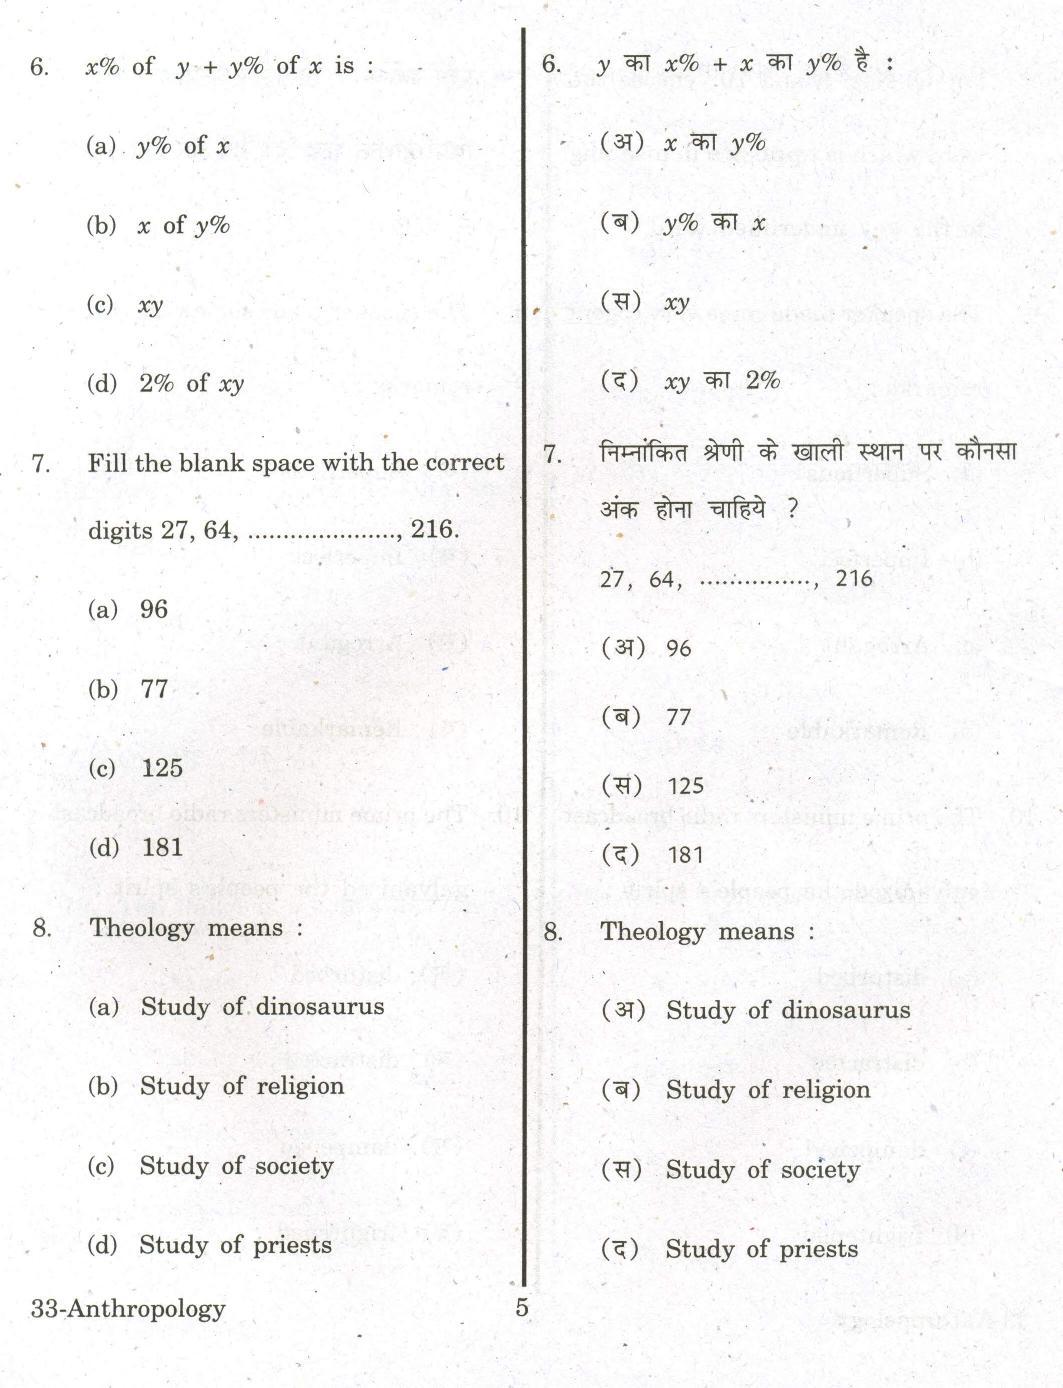 URATPG Anthropology 2013 Question Paper - Page 5